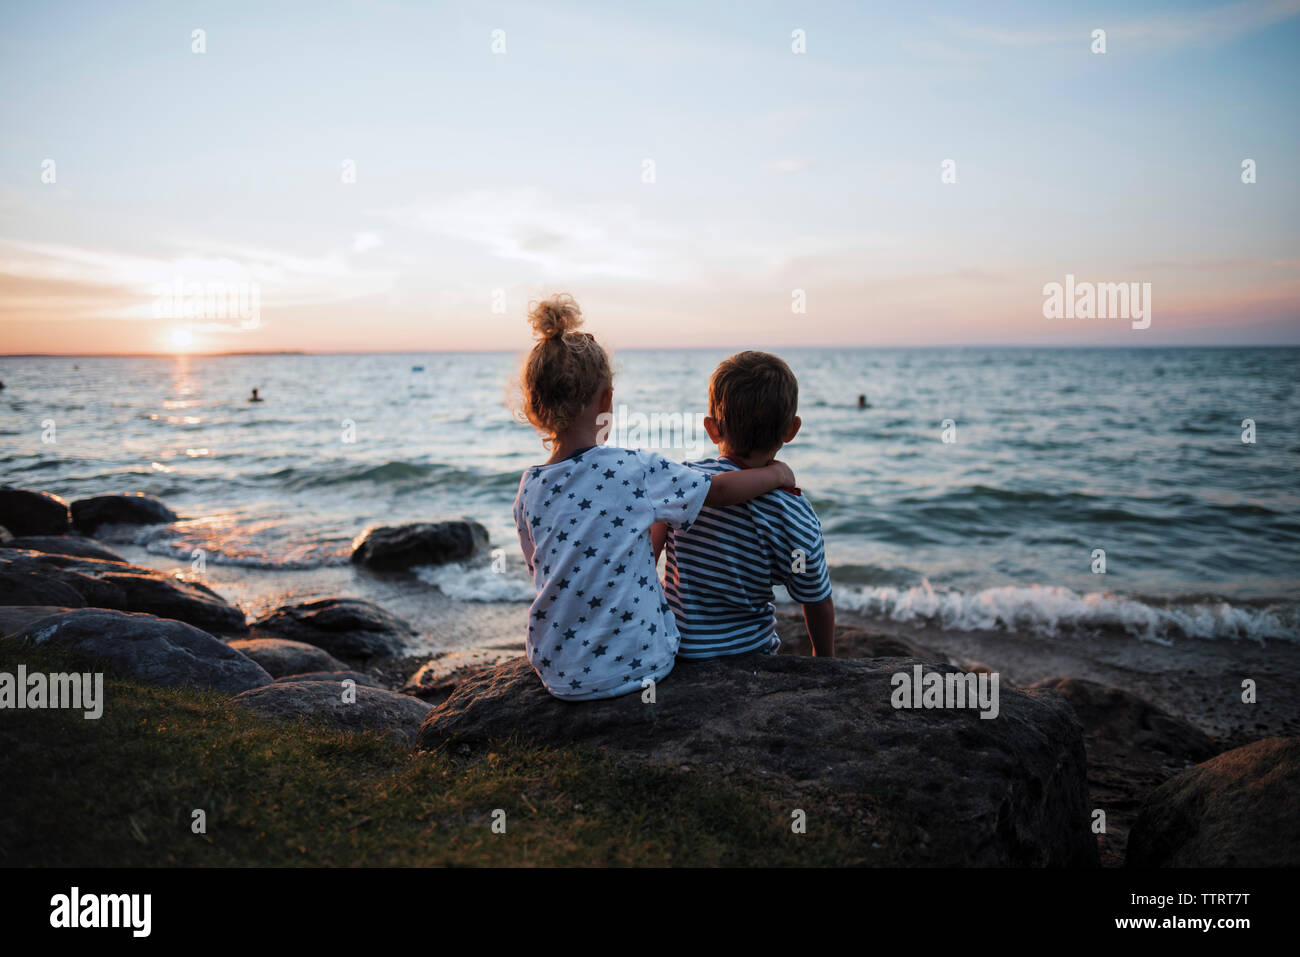 Rear view of siblings sitting on rocks by Lake Simcoe against sky during sunset Stock Photo